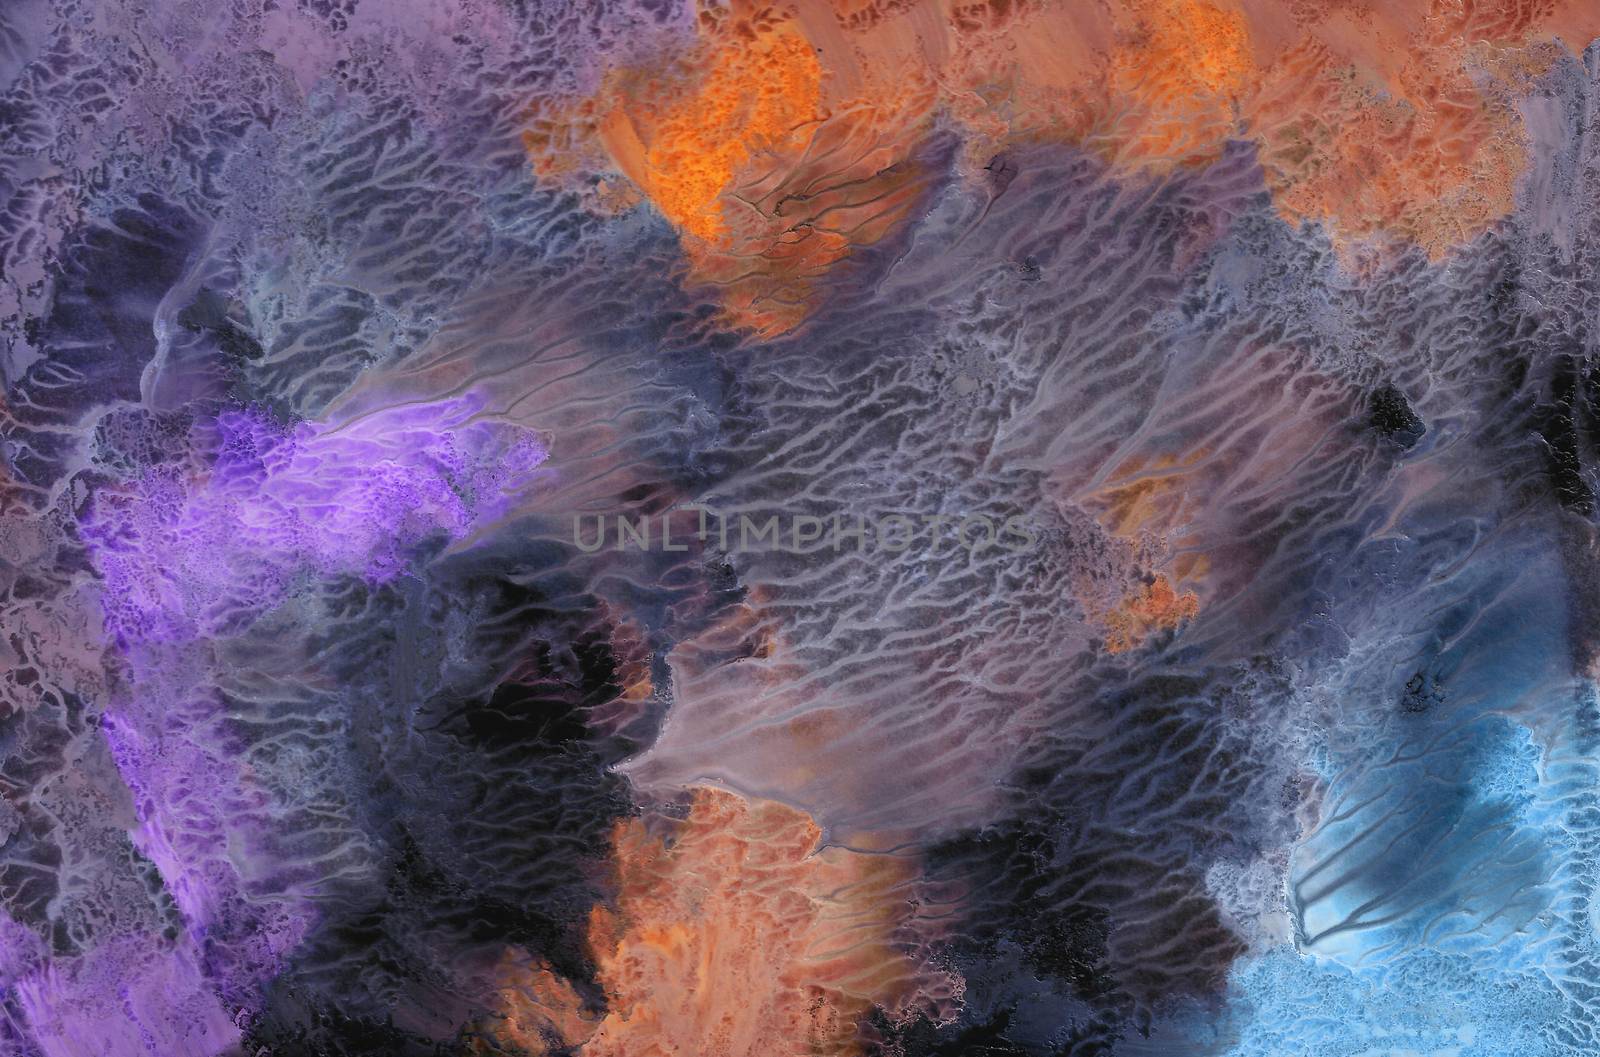 Hand-drawn texture, monotype, abstract background gouache painting, paint splashes, drops, strokes in grey, blue, orange, purple colors. Design for backgrounds, collages, designs, titles, price tags, flyers, wallpapers, covers and packaging.